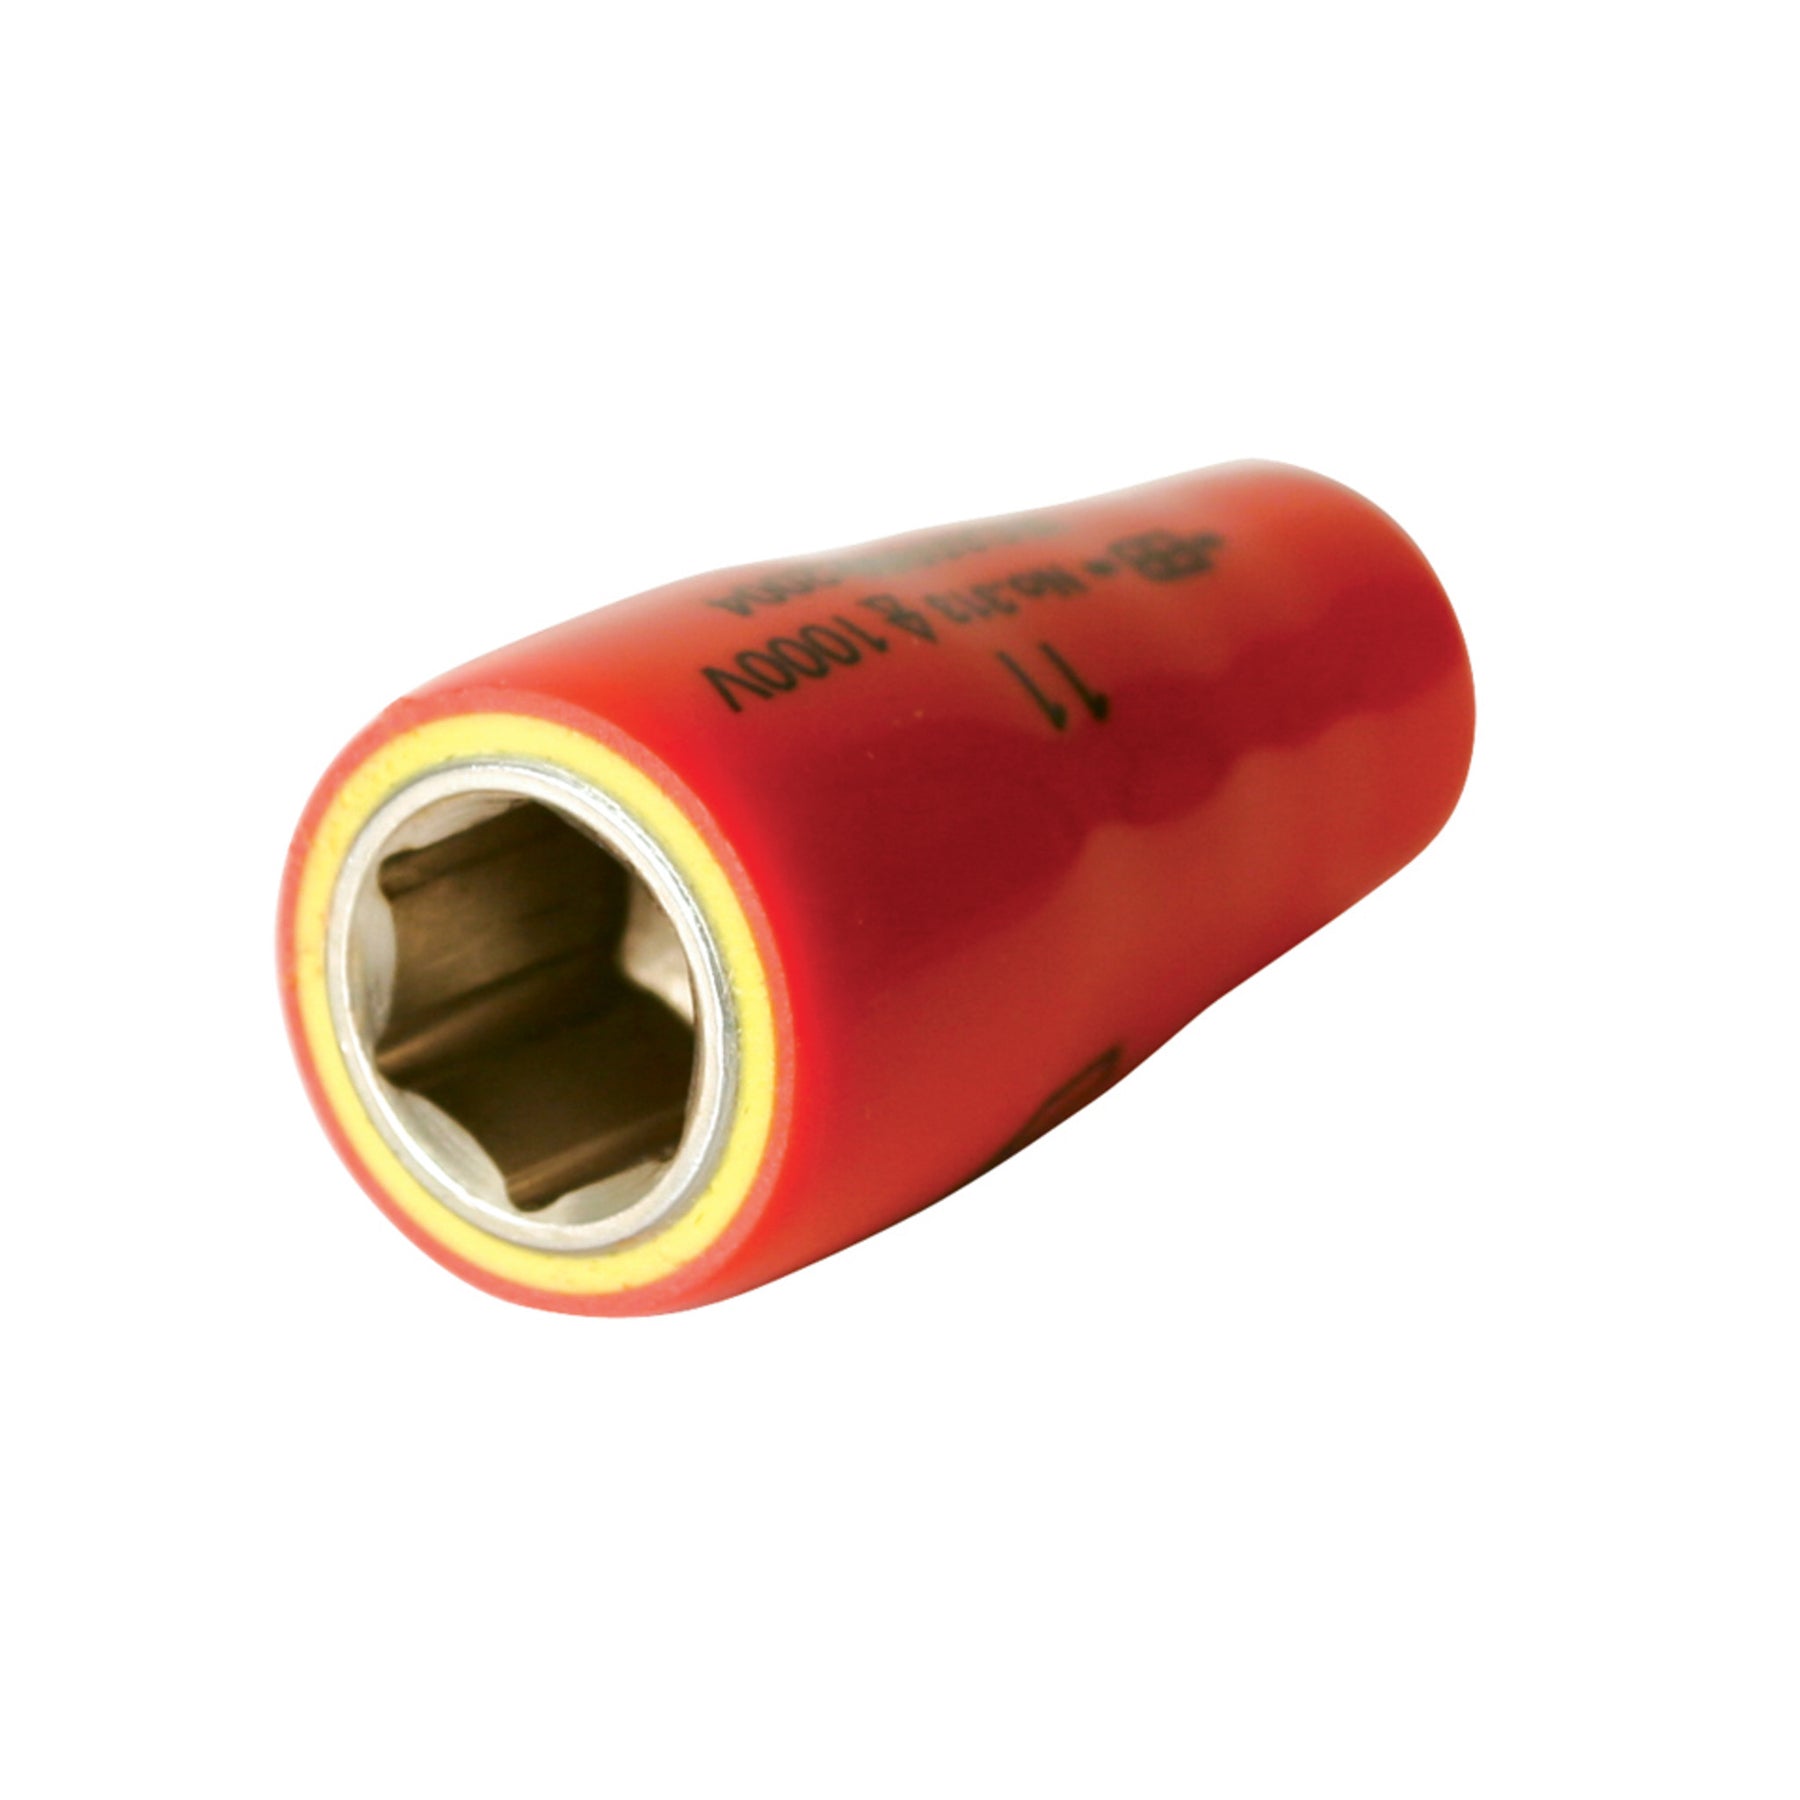 Insulated Socket 1/4" Drive 6mm